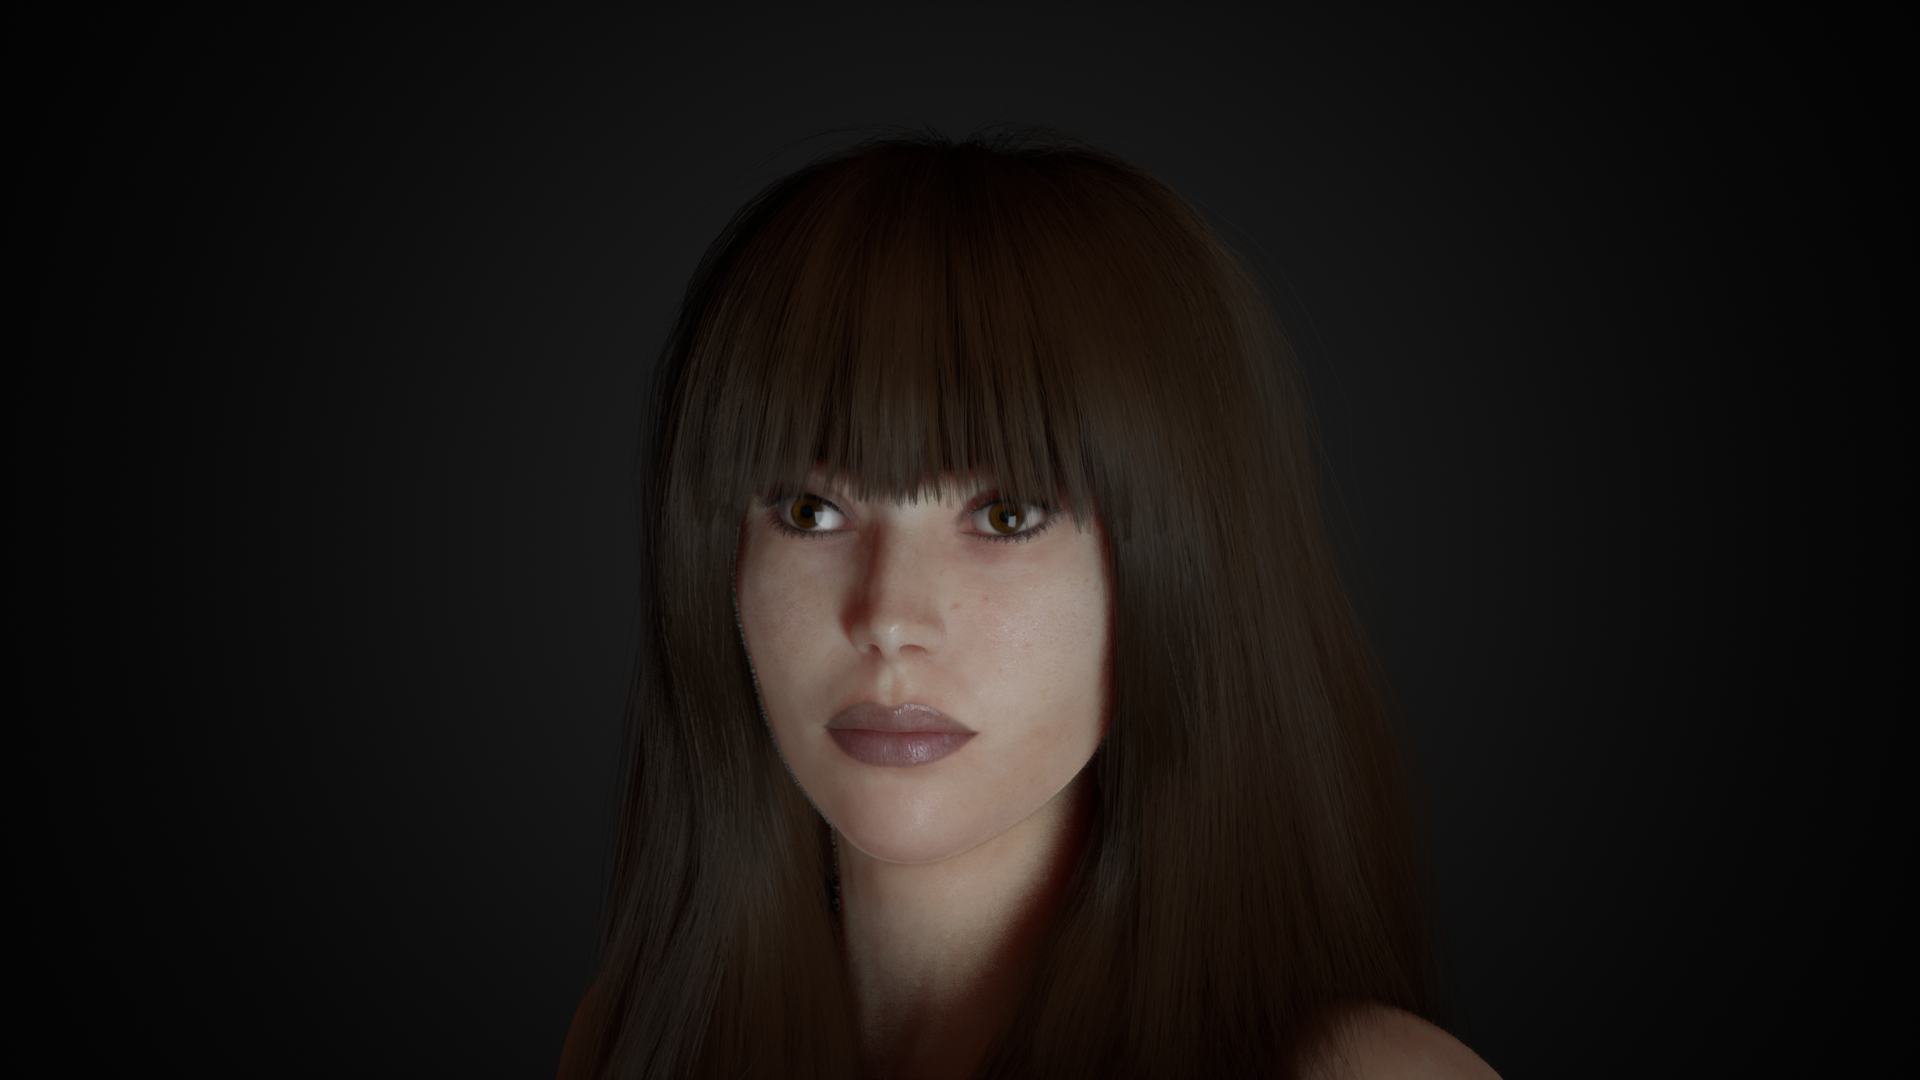 In-game footage of a female character created inside our character creation tool.